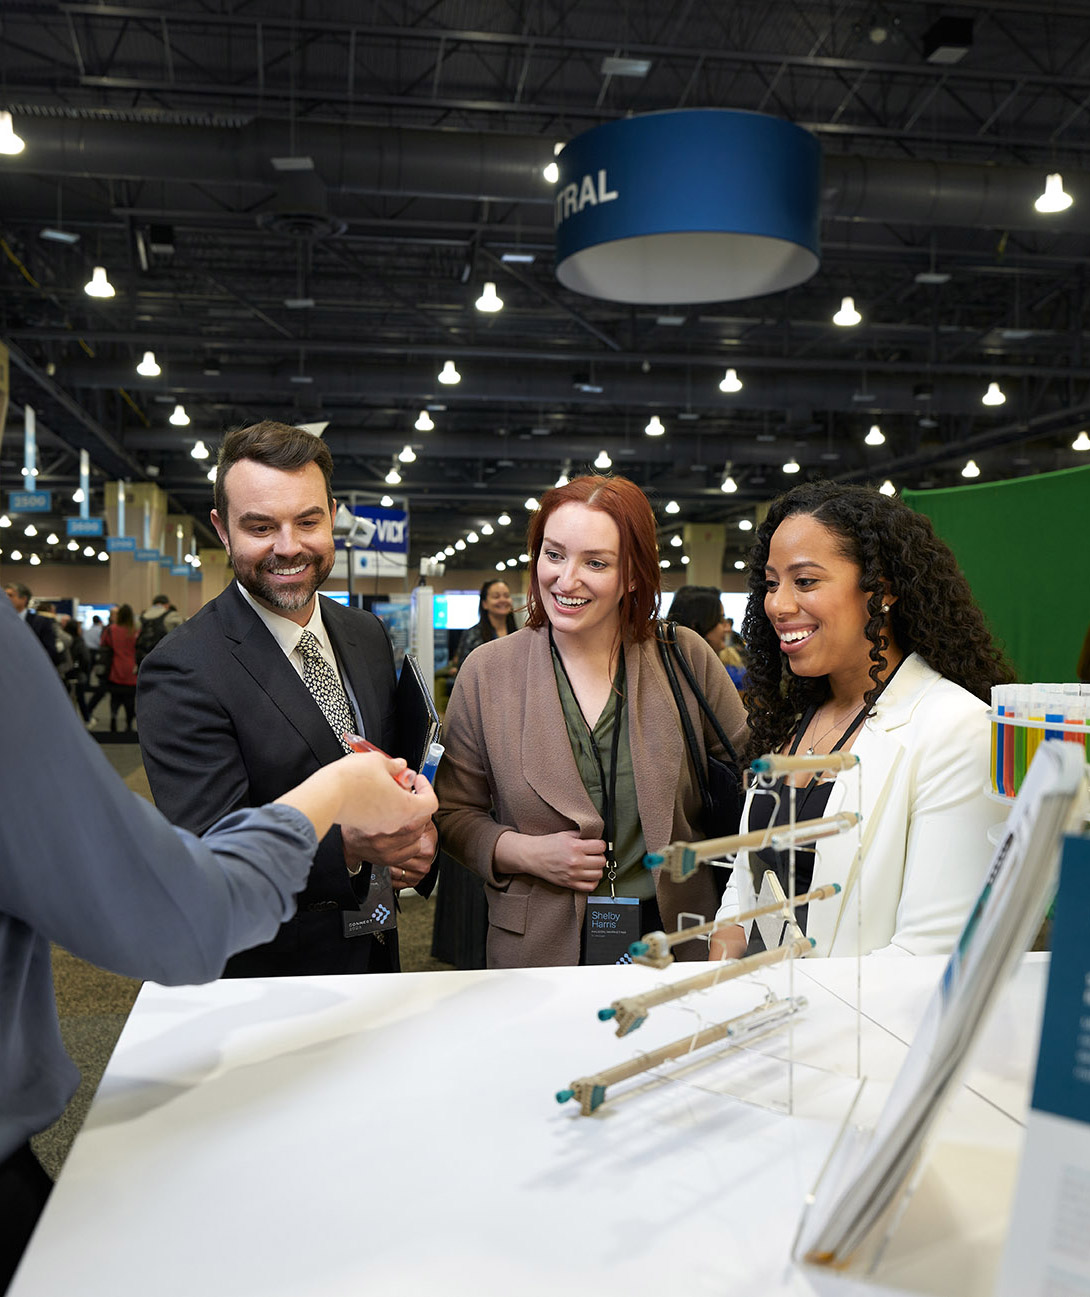 Three people speak to a person at a booth on the convention floor.